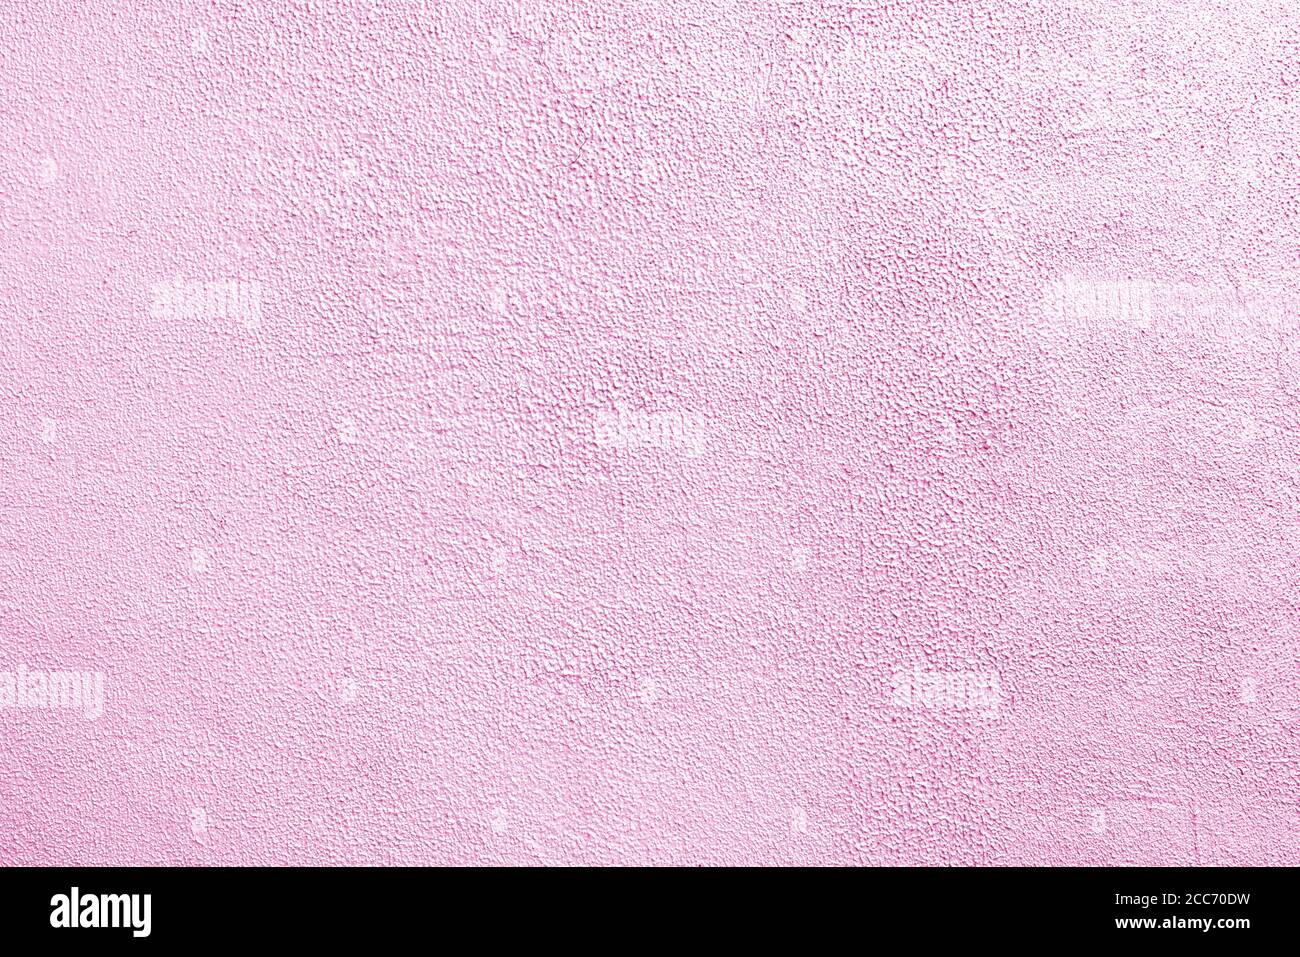 Pink wall of the building. Rough plaster surface. Abstract background. Stock Photo